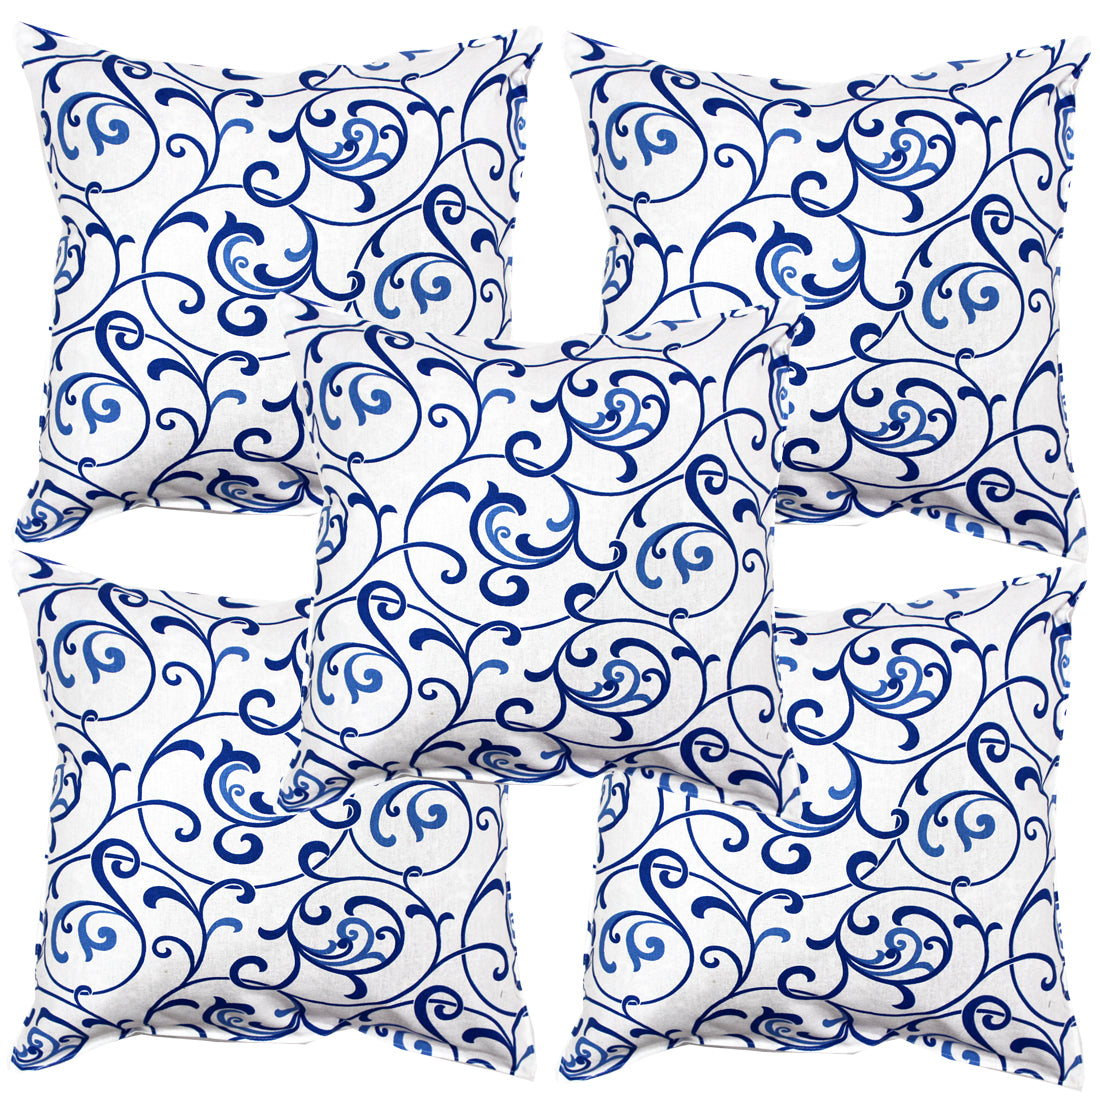 Soft Floral print Blue Cotton Cushion Cover Set online in India